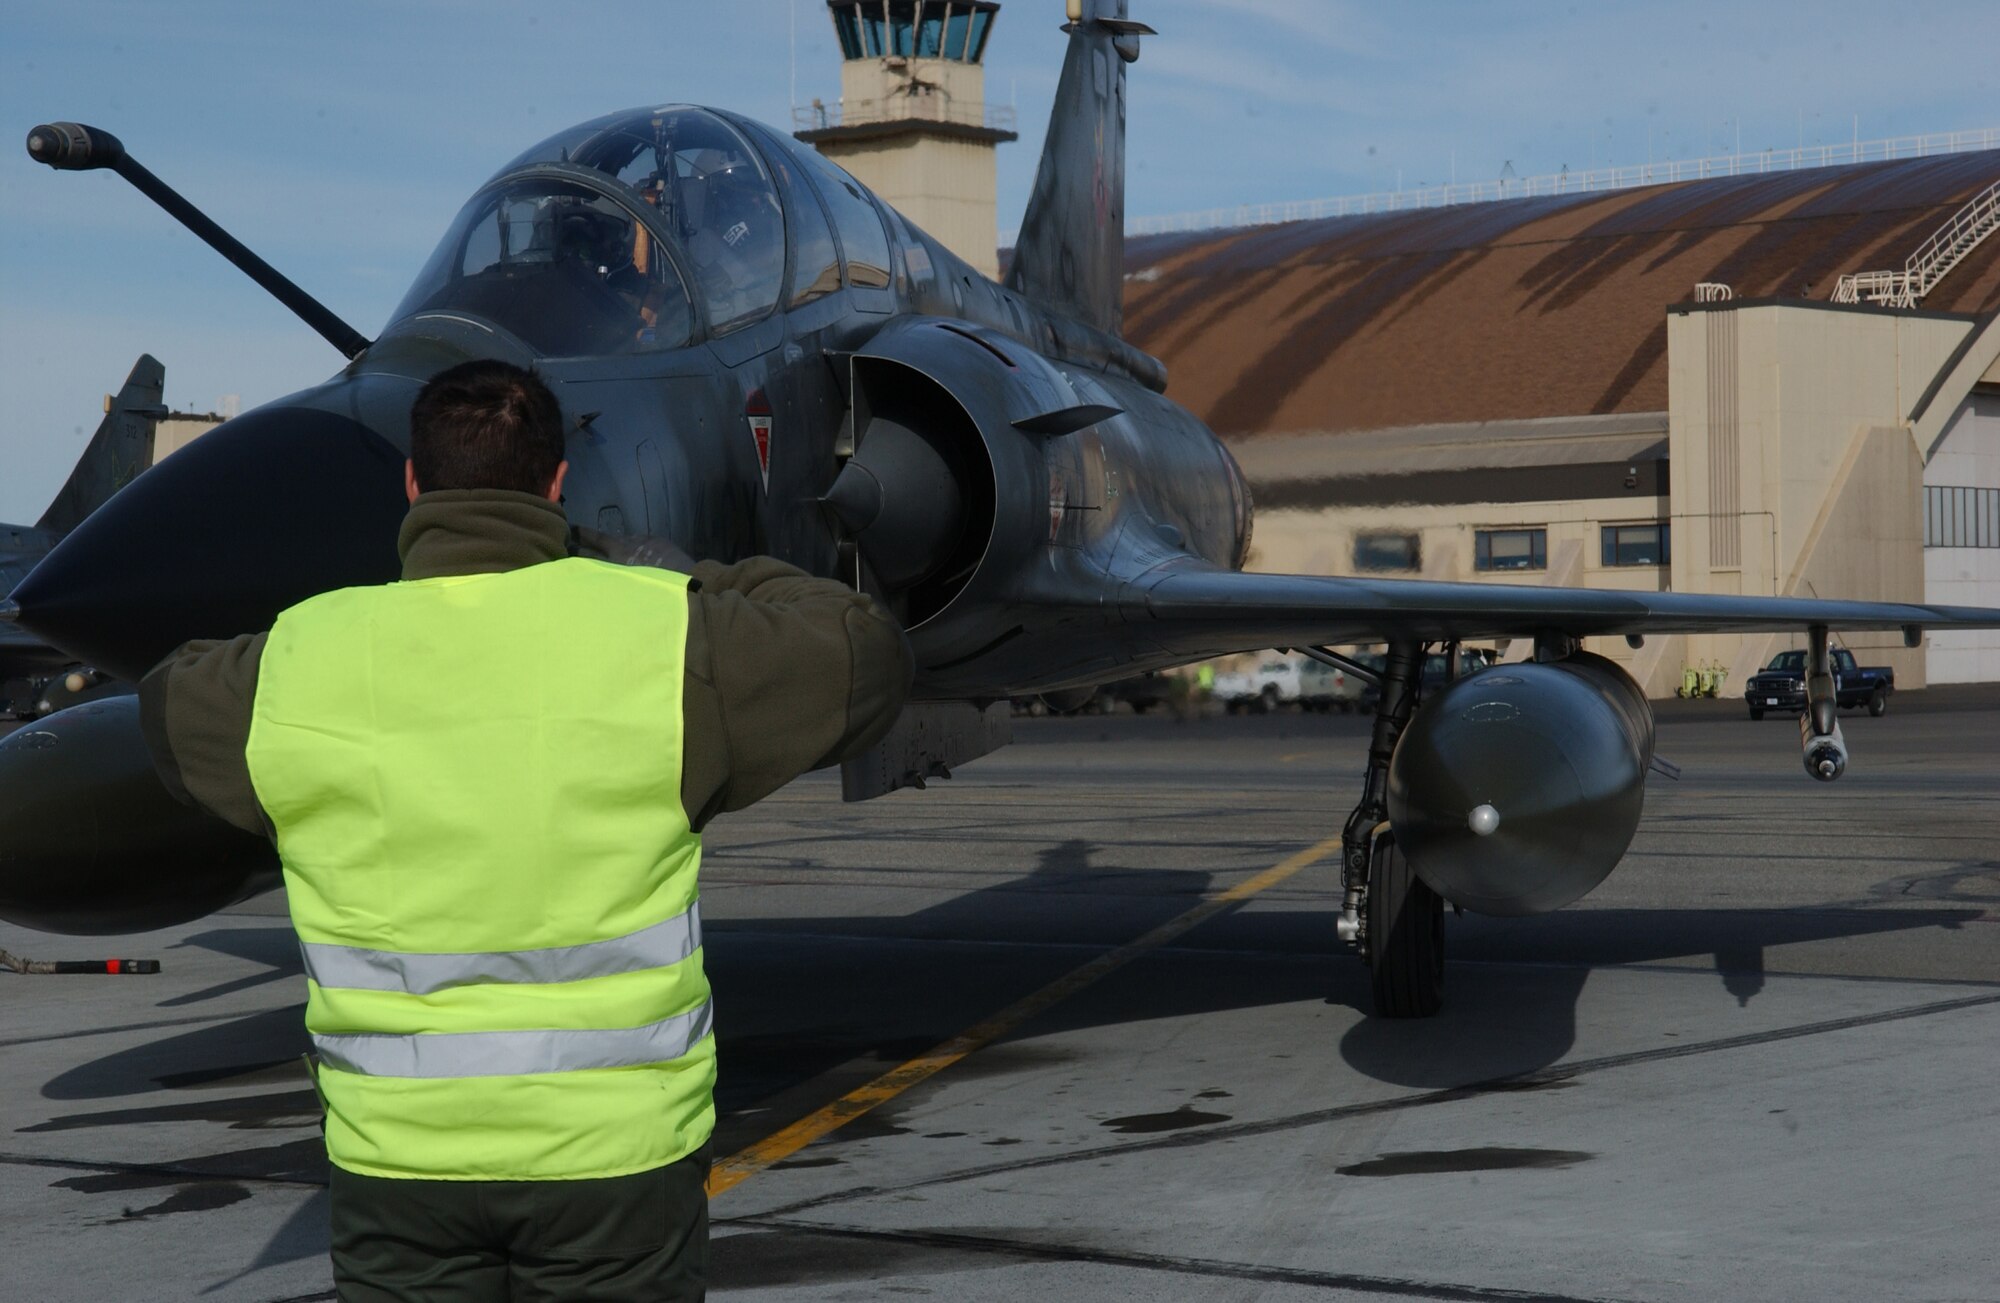 EIELSON AIR FORCE BASE, Alaska -- Technical Sgt. Vallier Julien, Armee de l'Air (French Air Force), marshalls a Mirage 2000 on the flight line on April 6 during Red Flag-Alaska 07-1. This exercise provides unique opportunities to help integrate various forces into joint, coalition, and bilateral training from simulated forward operating bases. (U.S. Air Force Photo by Airman 1st Class Jonathan Snyder) (Released)